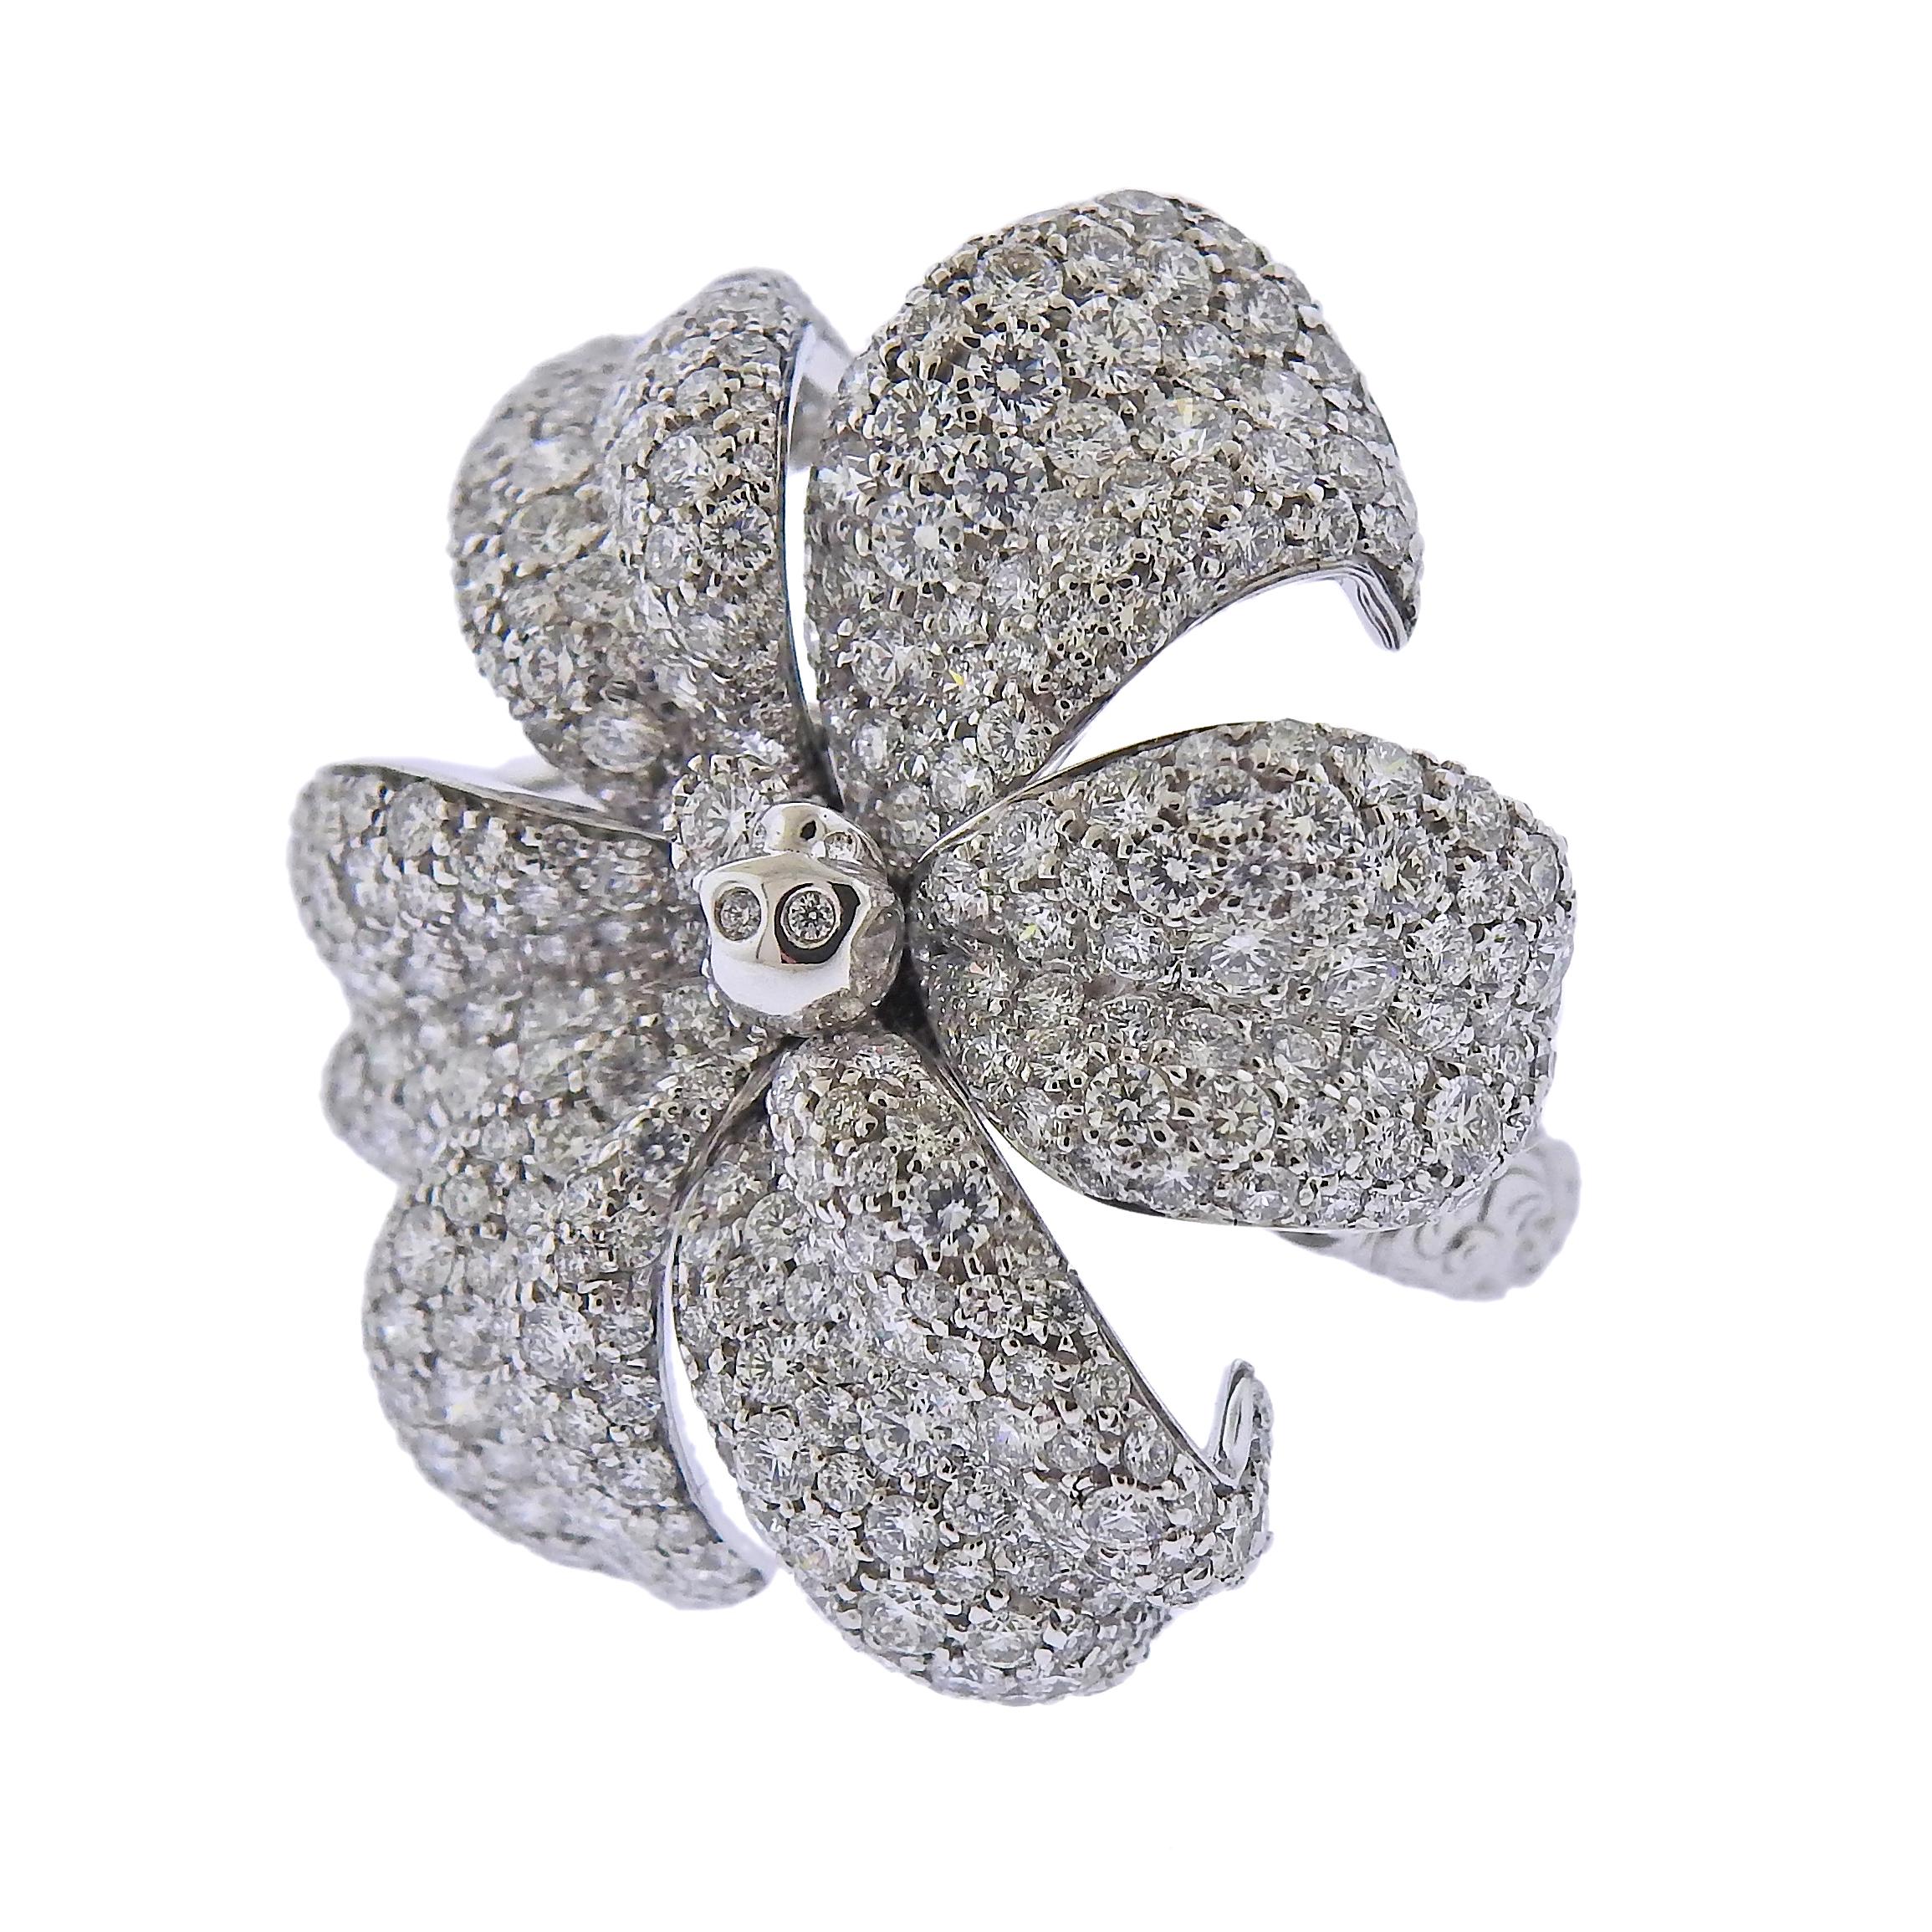 18k white gold flower Flora ring by Gucci, set with approx. 5.64ctw in G/VS diamonds. Approx. retail $25000. With box/papers.  Ring size - 6.25, ring top - 31mm x 30mm. Marked: Gucci, 14, Au750, made in Italy.  Weight - 19.2 grams. 